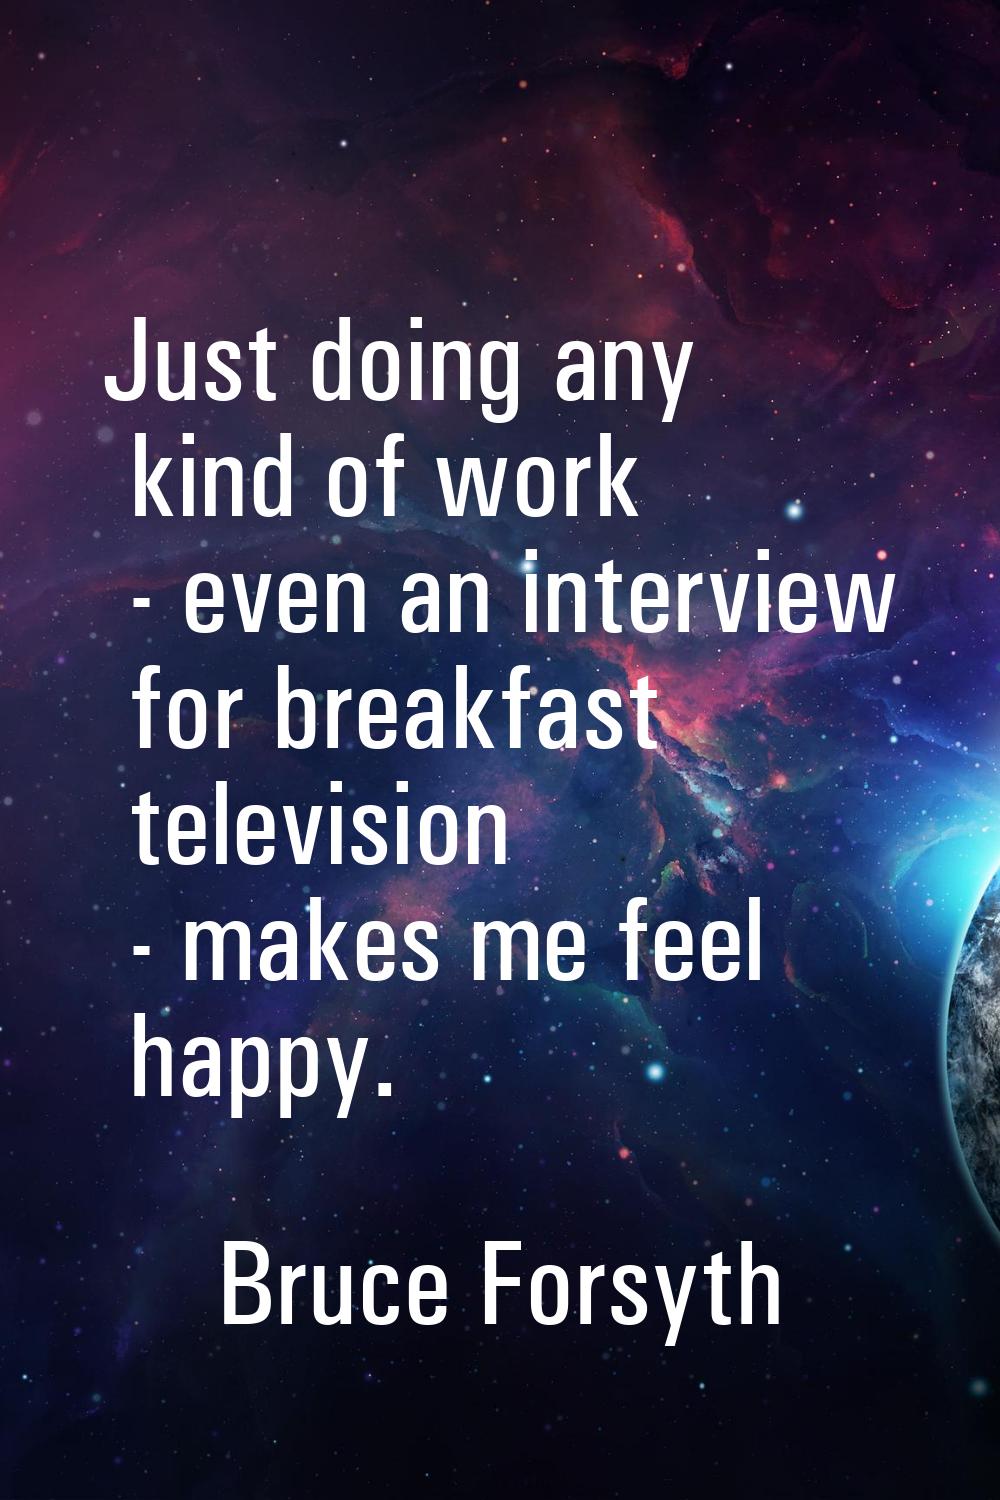 Just doing any kind of work - even an interview for breakfast television - makes me feel happy.